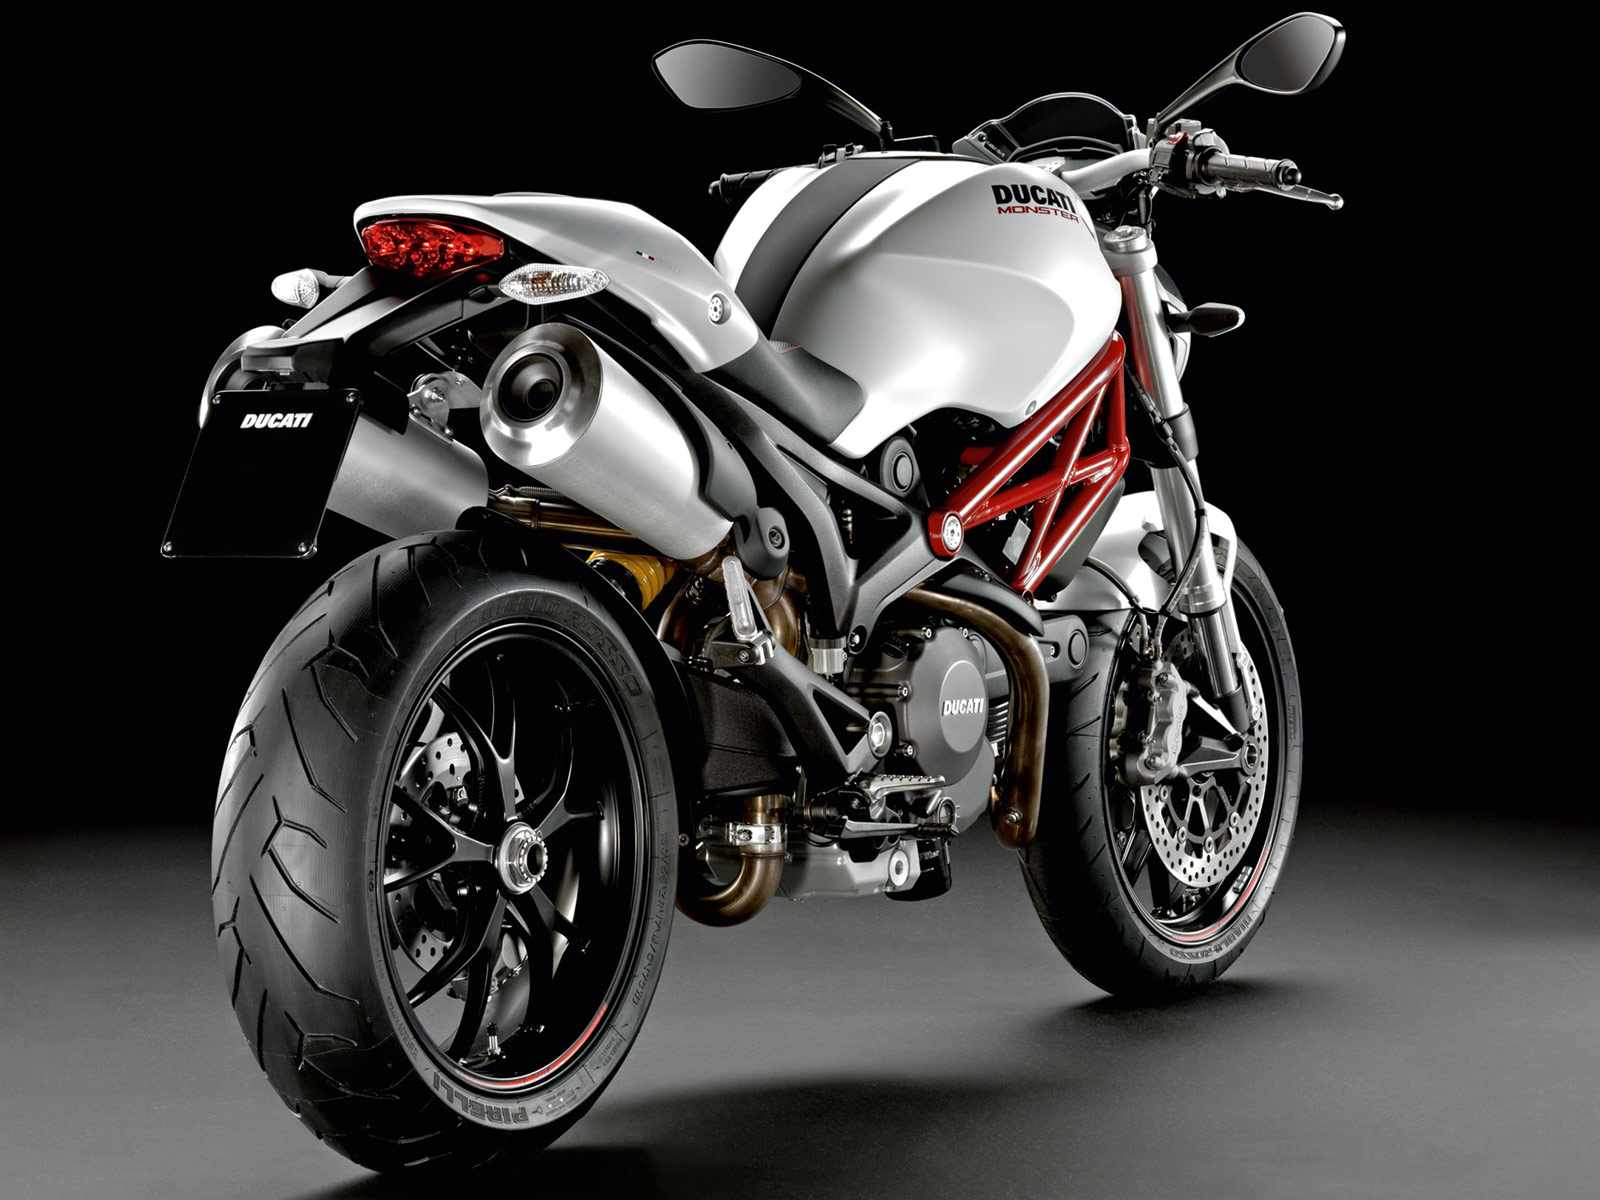 2013 Ducati Monster 796 motorcycle photos and insurance informations